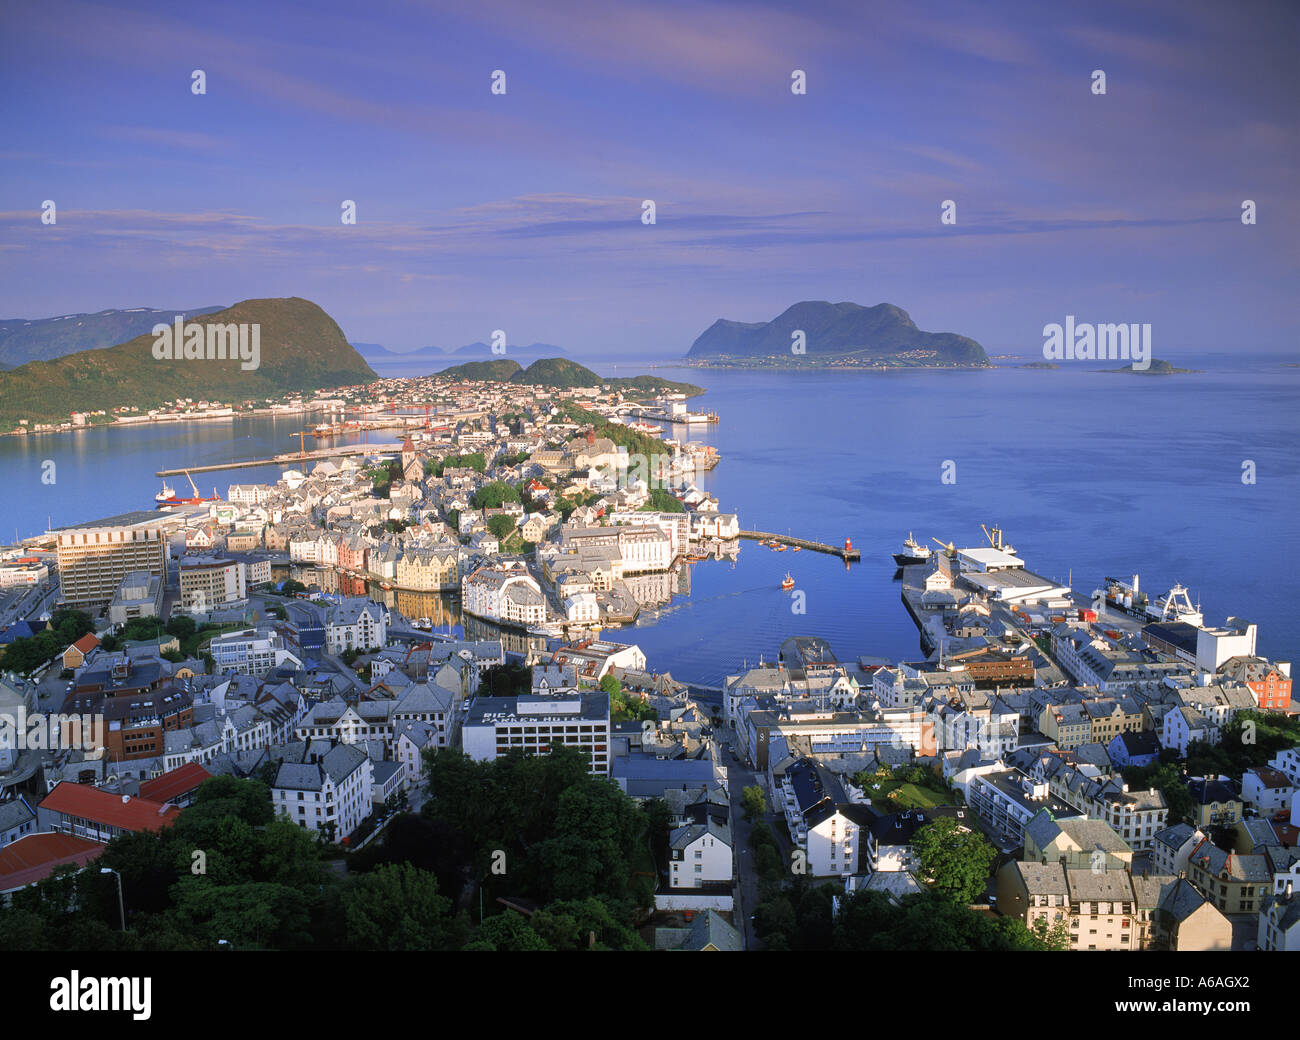 Overview of coastal village of Ålesund in Northern Norway at dawn Stock Photo